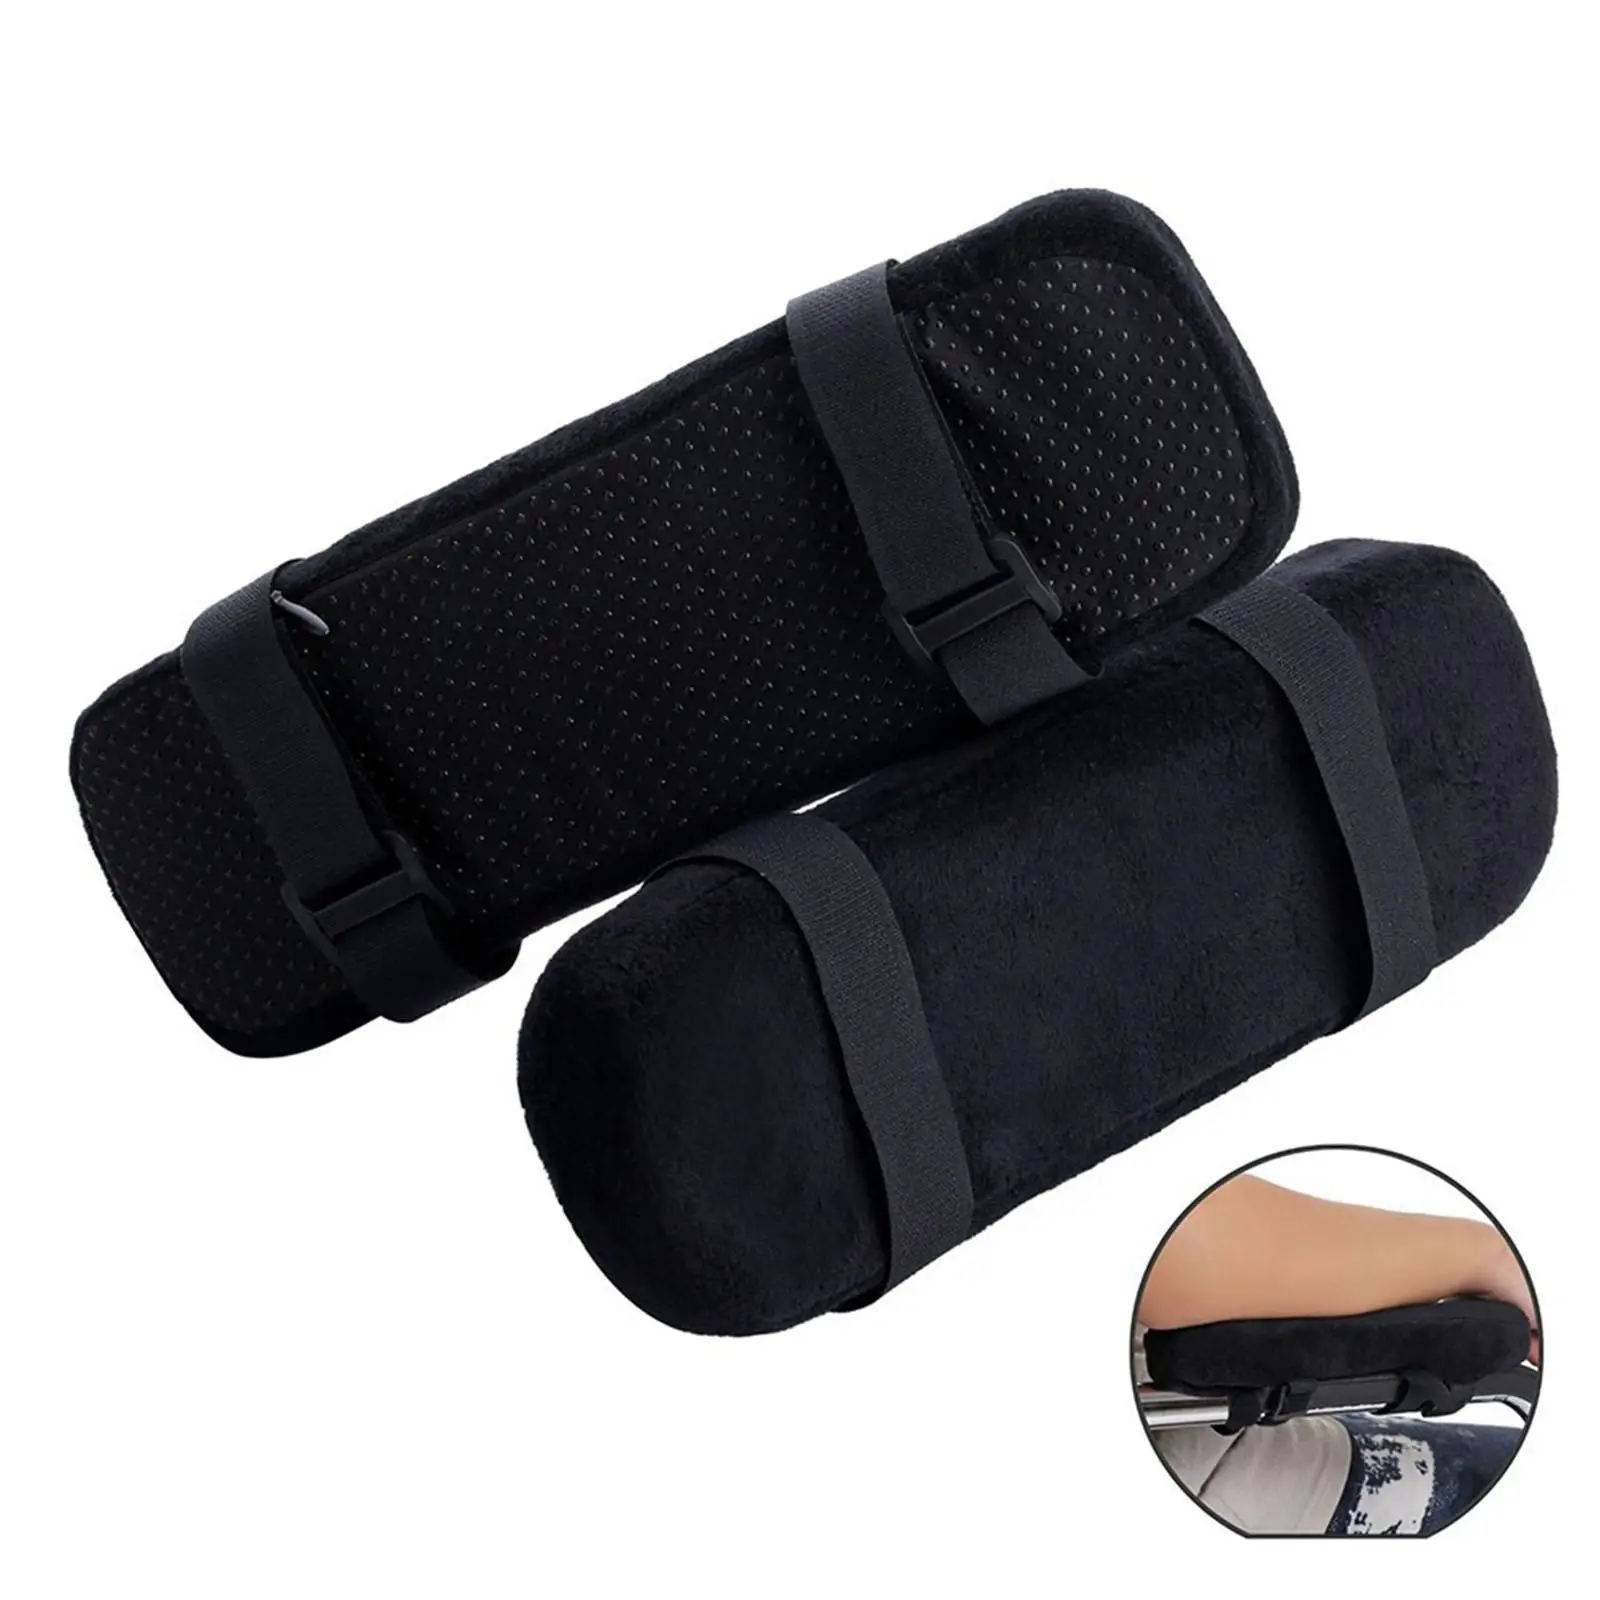 Portable Armrest Pad Pressure Relief Washable Comfort Arm Pad Arm Rest Cushion Elbow  for Gaming Chair Office Sleeping